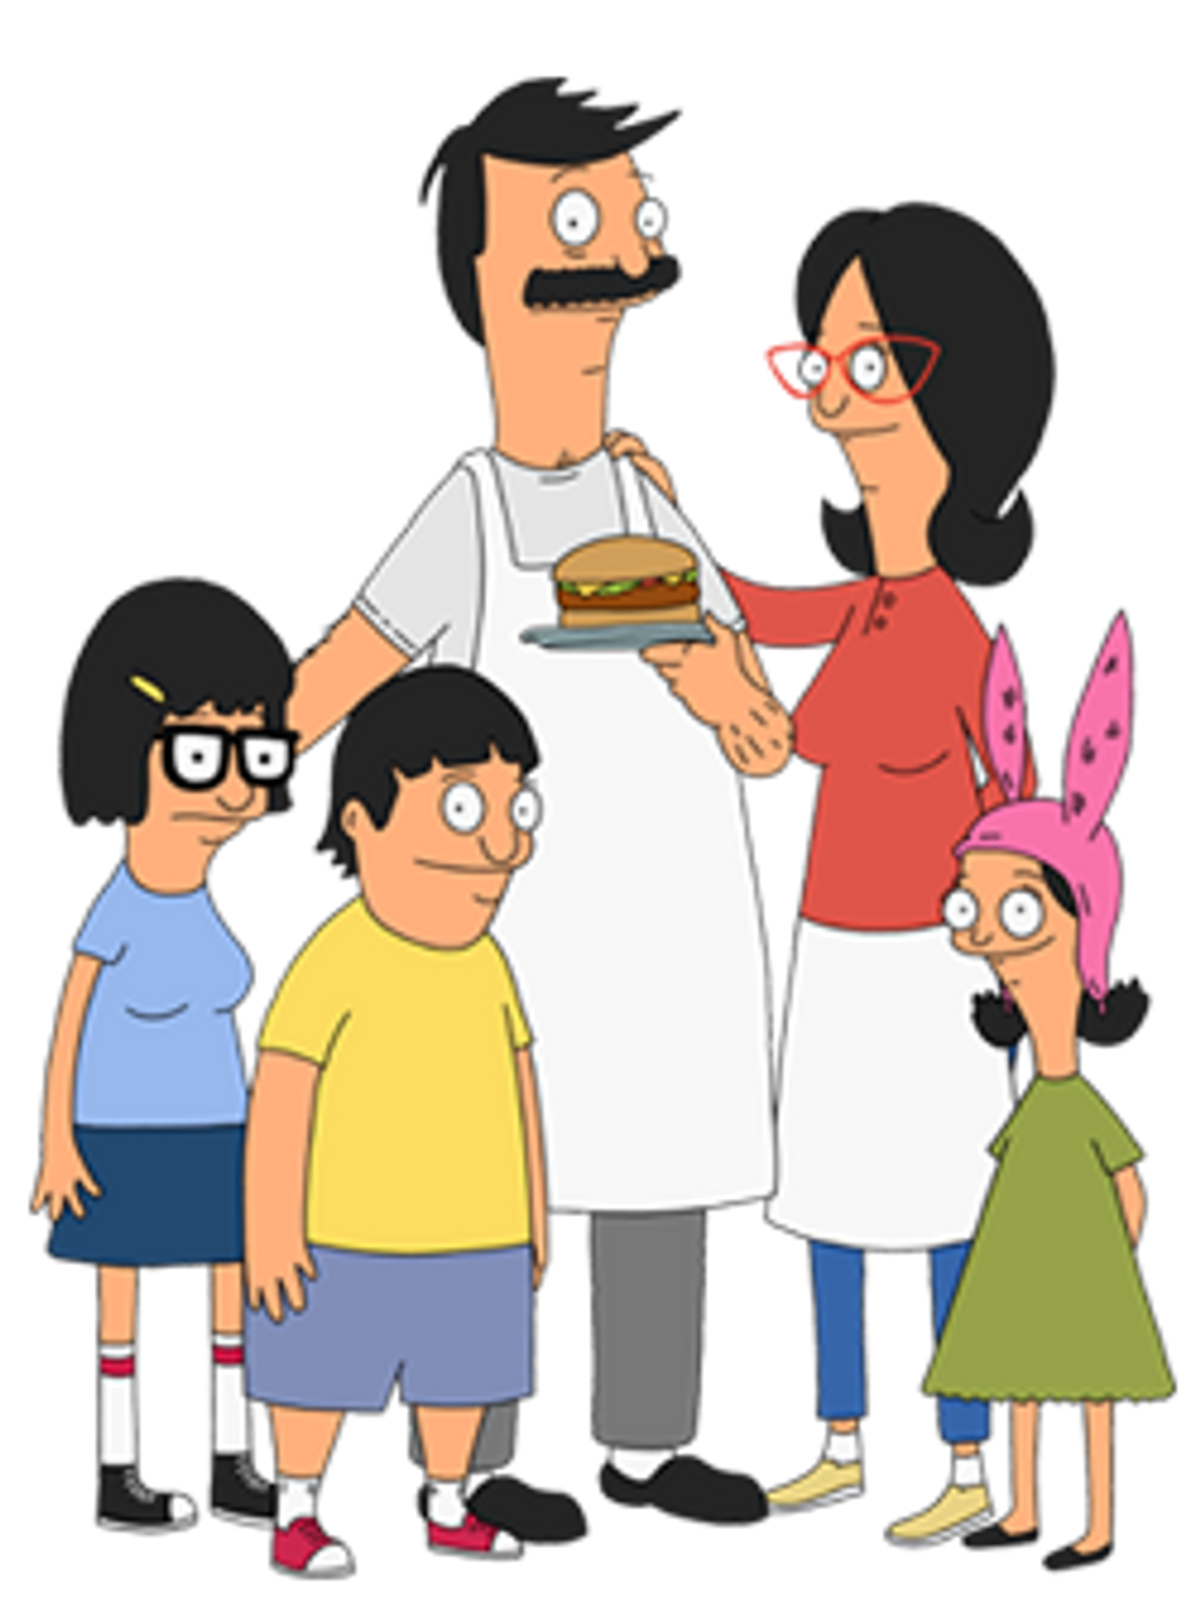 17 Pieces Of Dating Advice From The Belchers